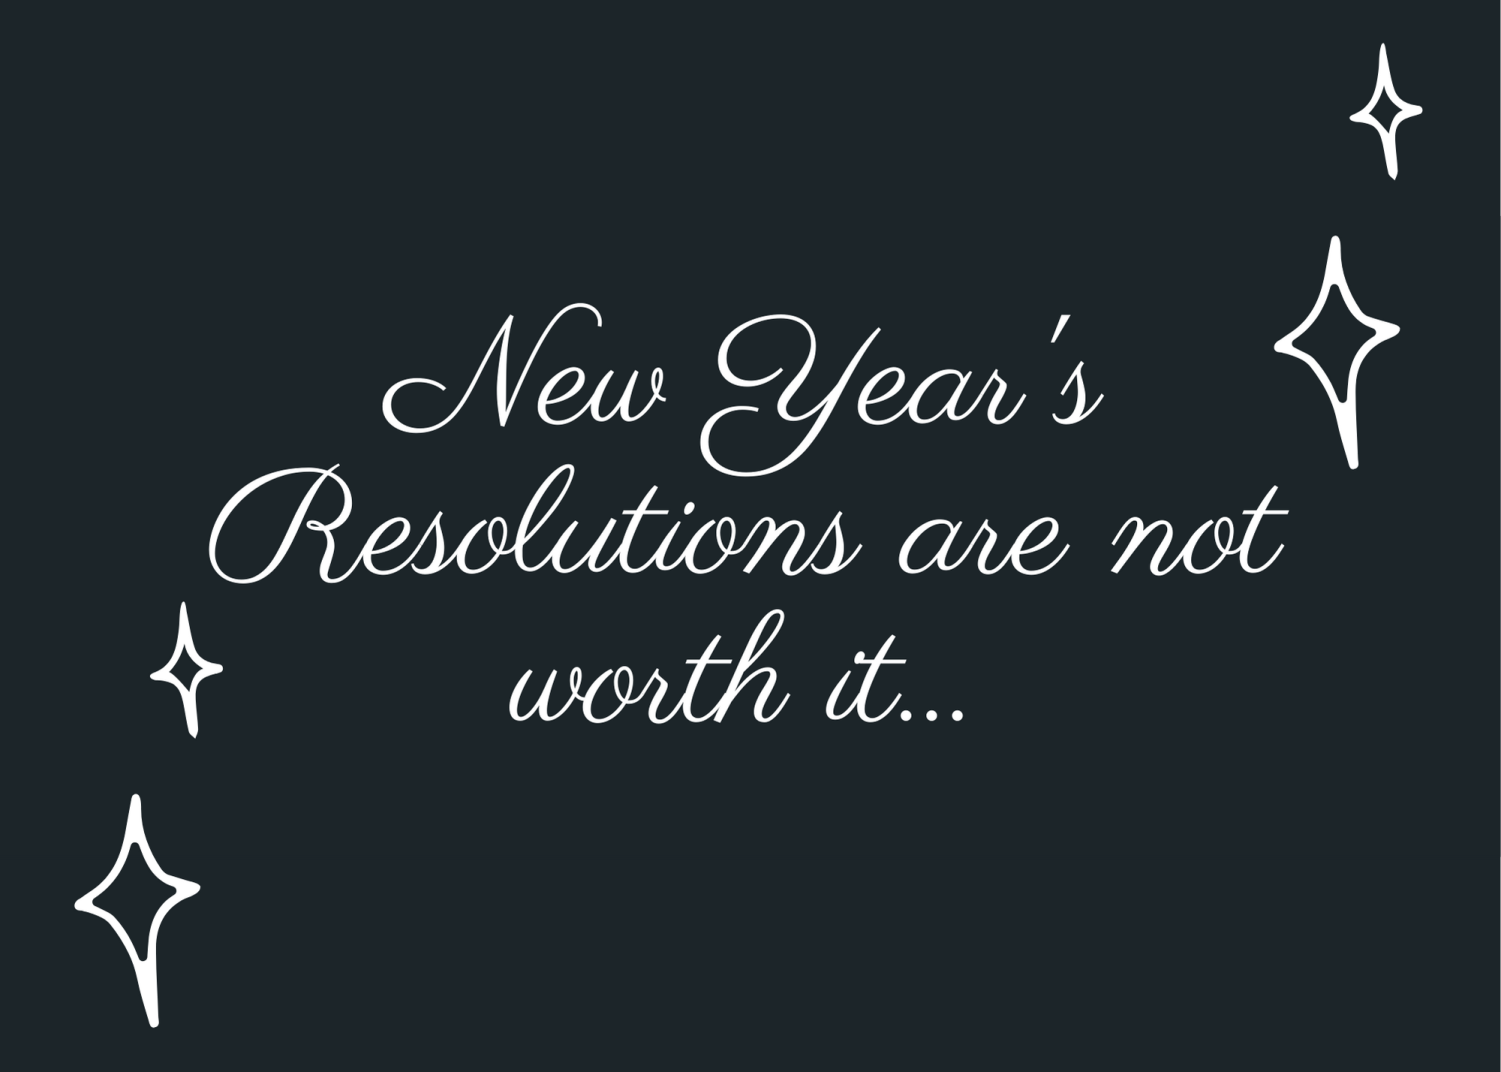 New Year: Are resolutions really worth it?